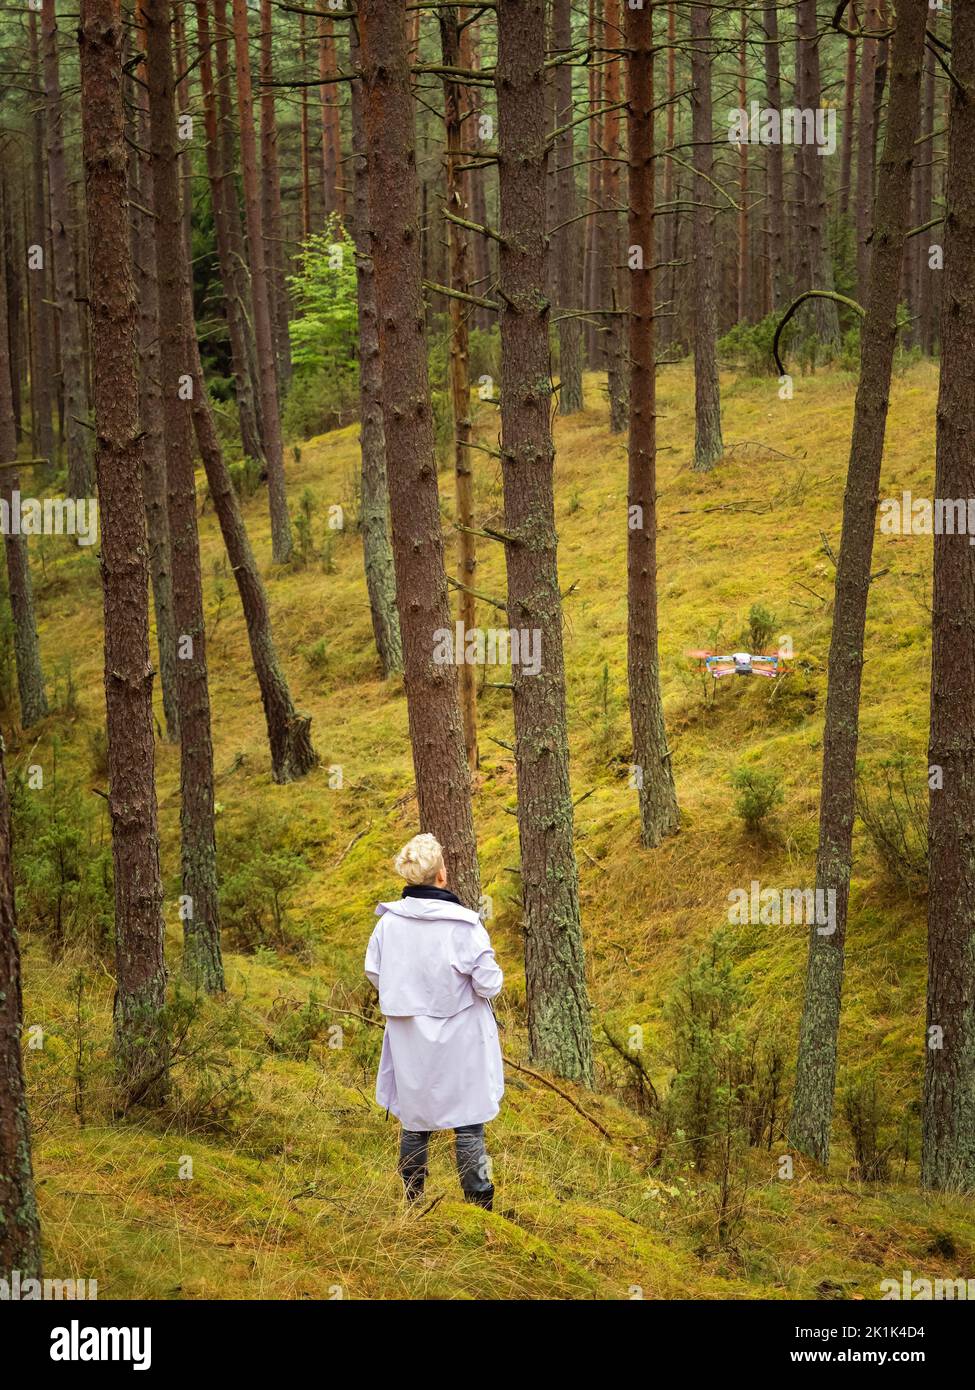 one person launching a drone in a deep pine forest between tree trunks in a ravine Stock Photo